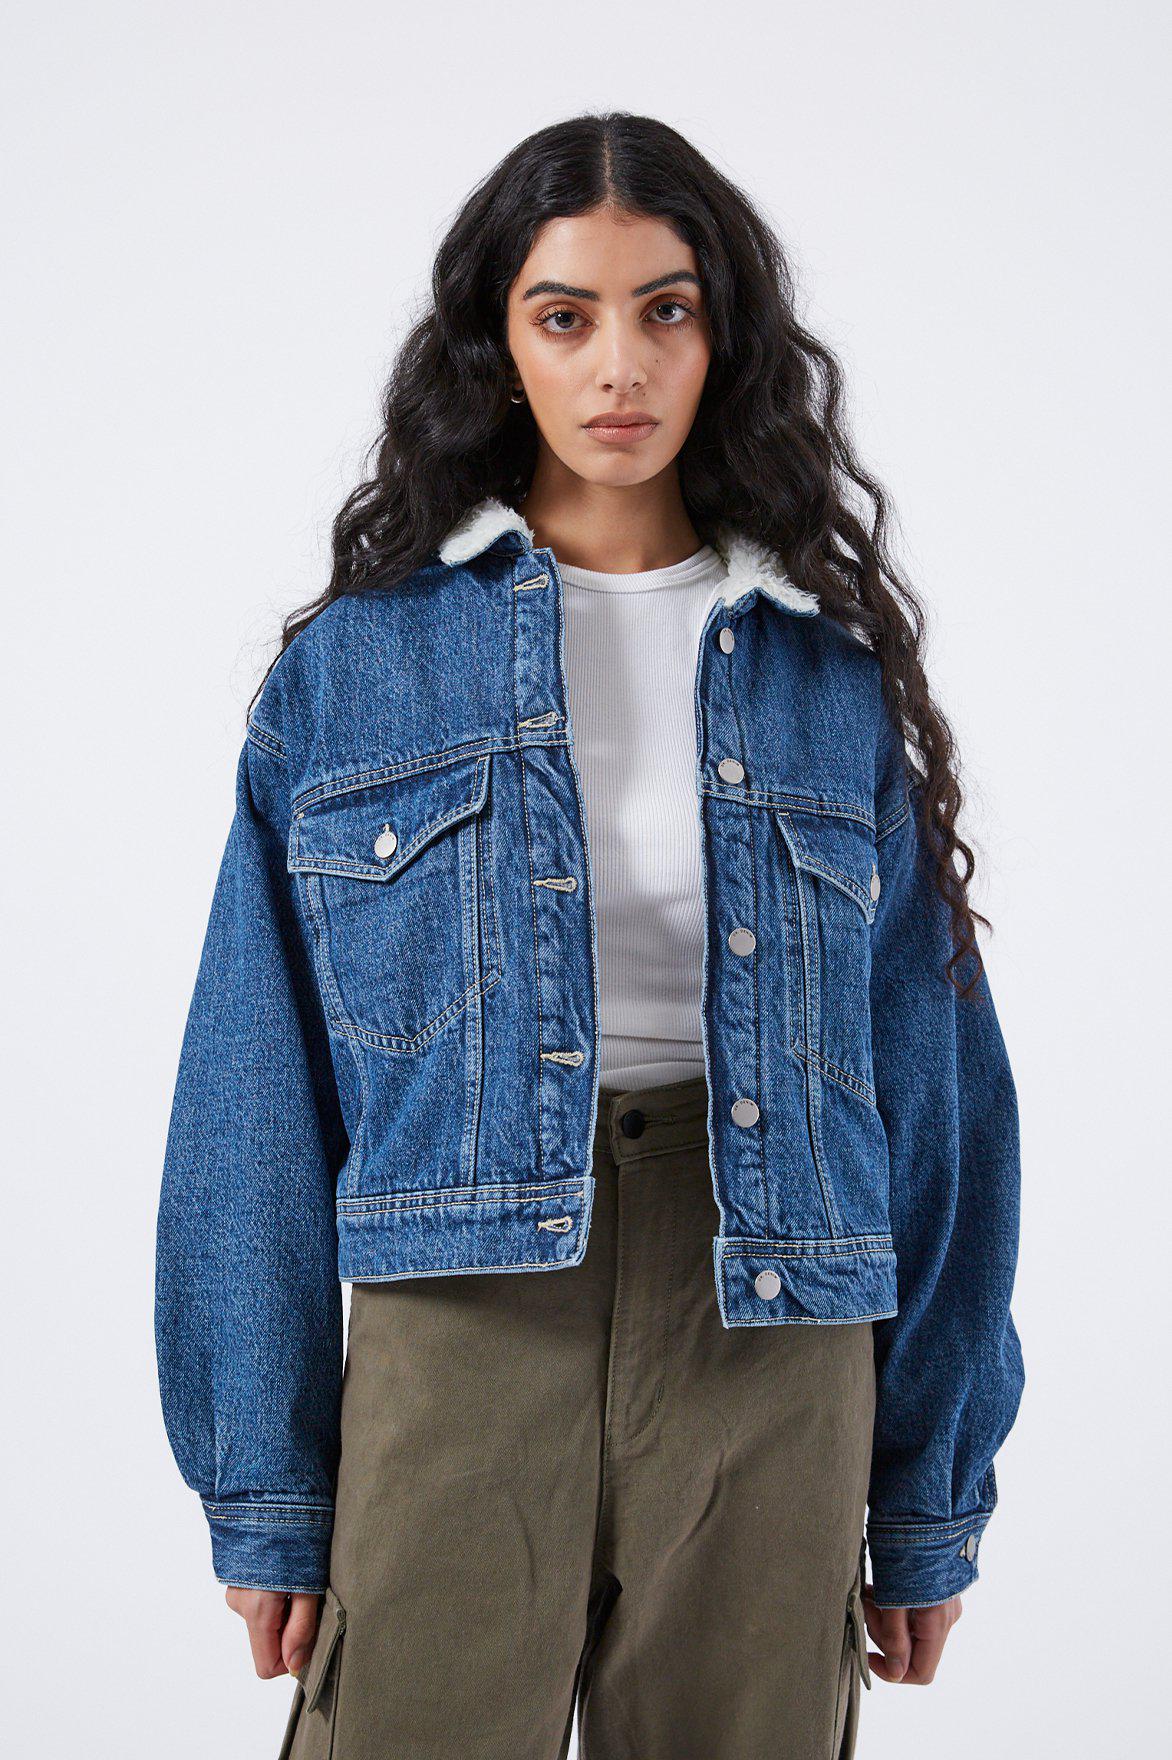 Women's Tops & Jackets – Page 2 – Dr. Denim